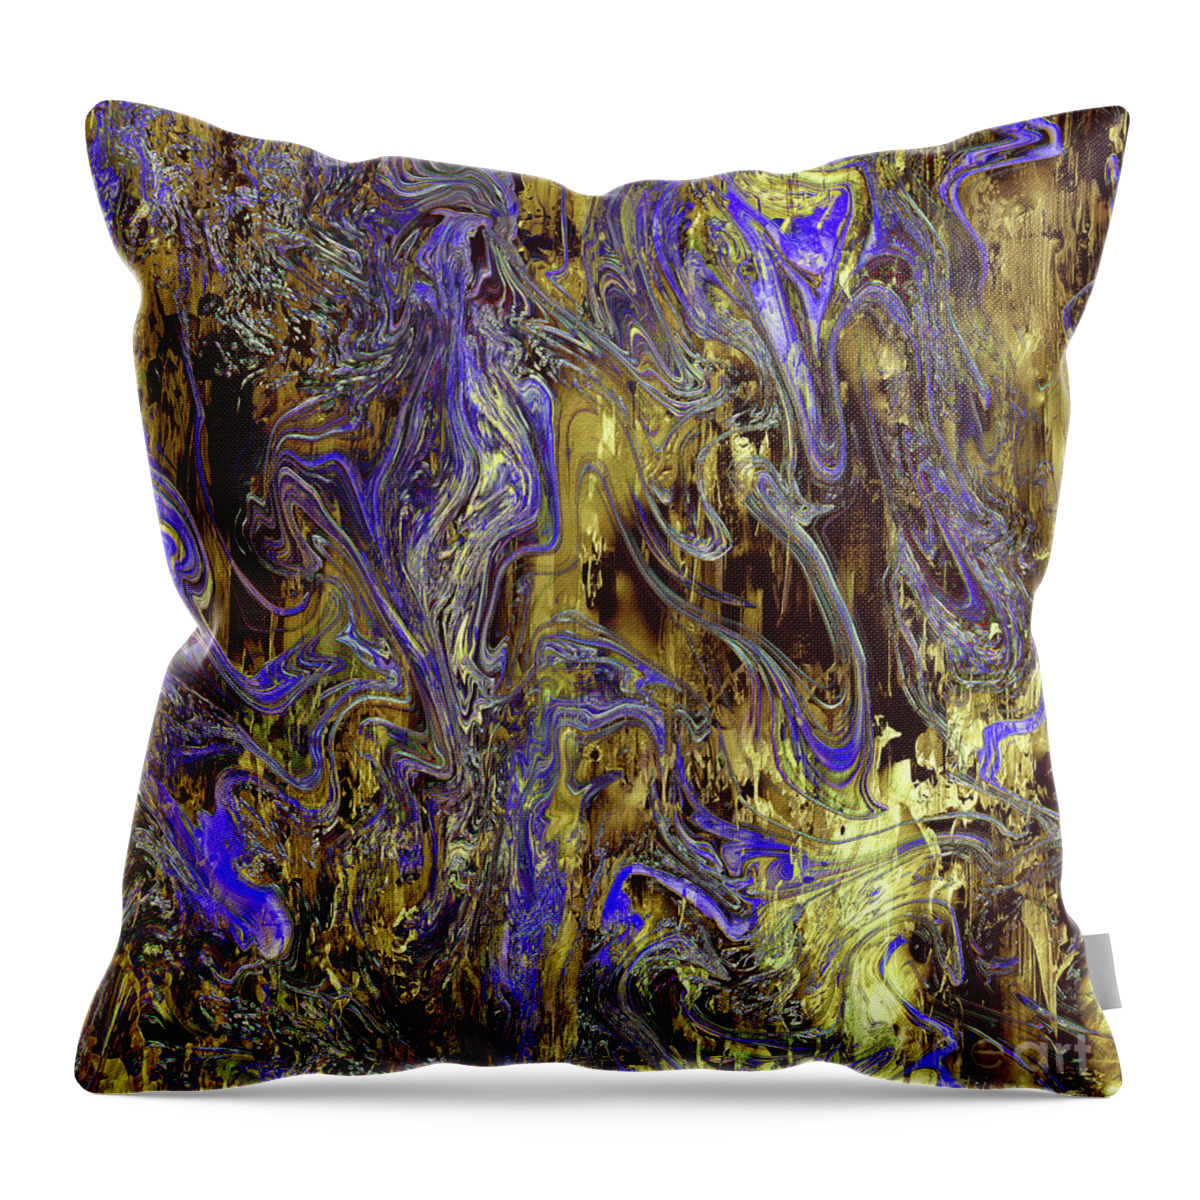 A-fine-art Throw Pillow featuring the painting Following My Dream 4 by Catalina Walker